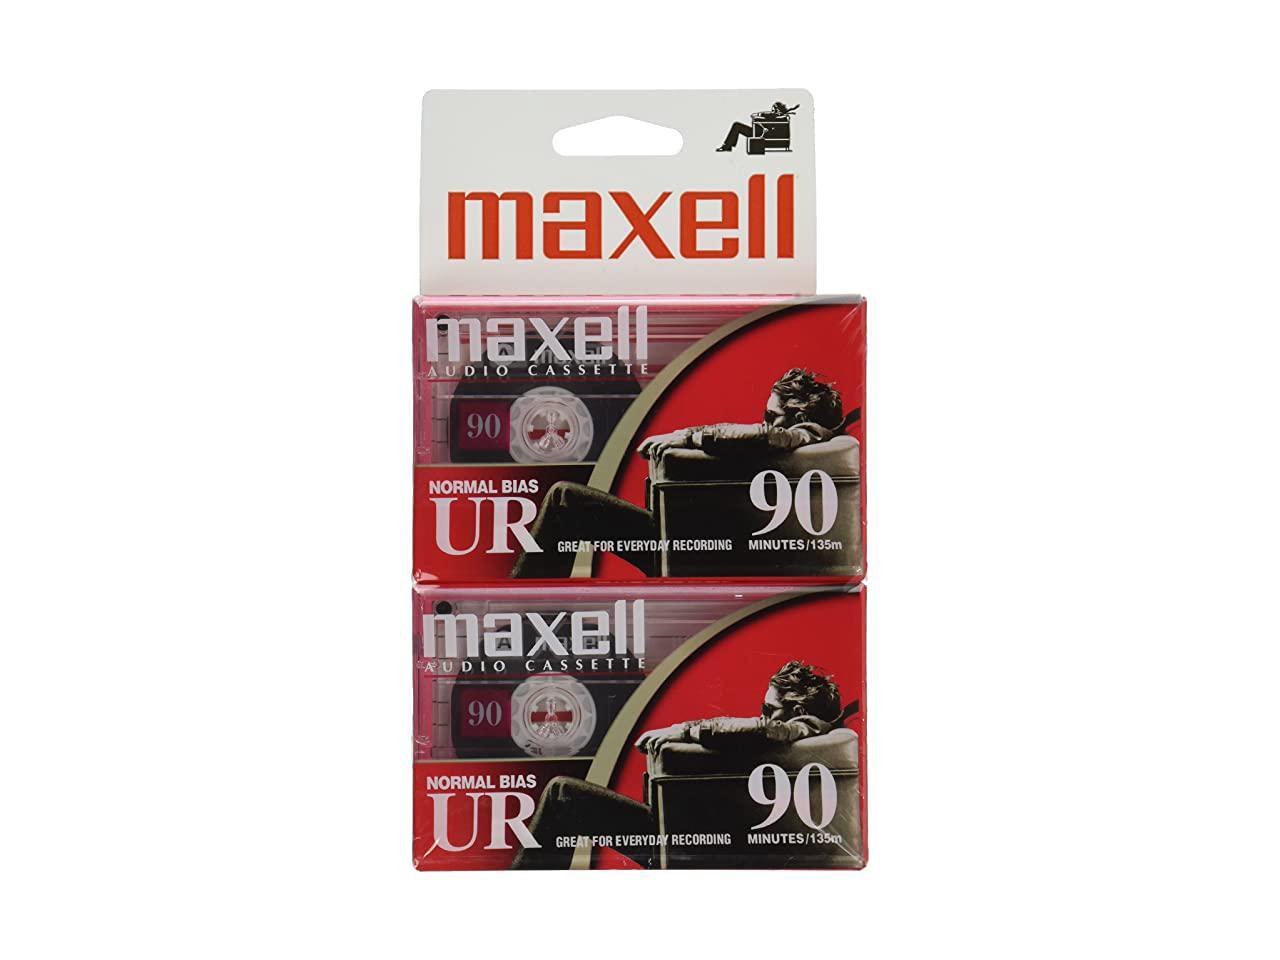 Maxell 108527 Optimally Designed Flat Packs with Low Noise Surface 90 Min Recording Time Per Cassette 